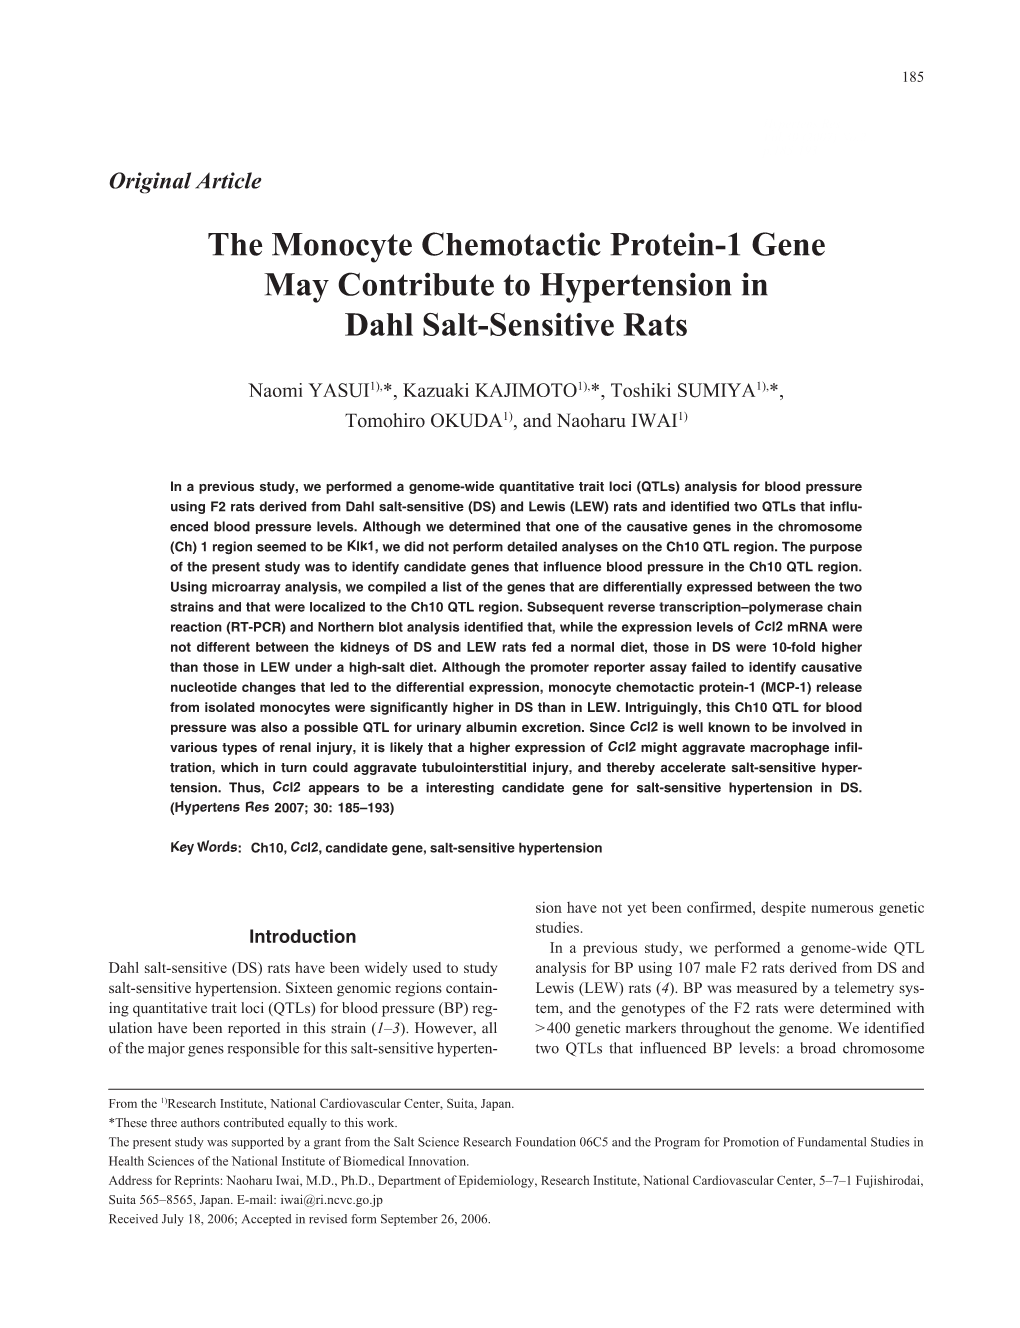 The Monocyte Chemotactic Protein-1 Gene May Contribute to Hypertension in Dahl Salt-Sensitive Rats